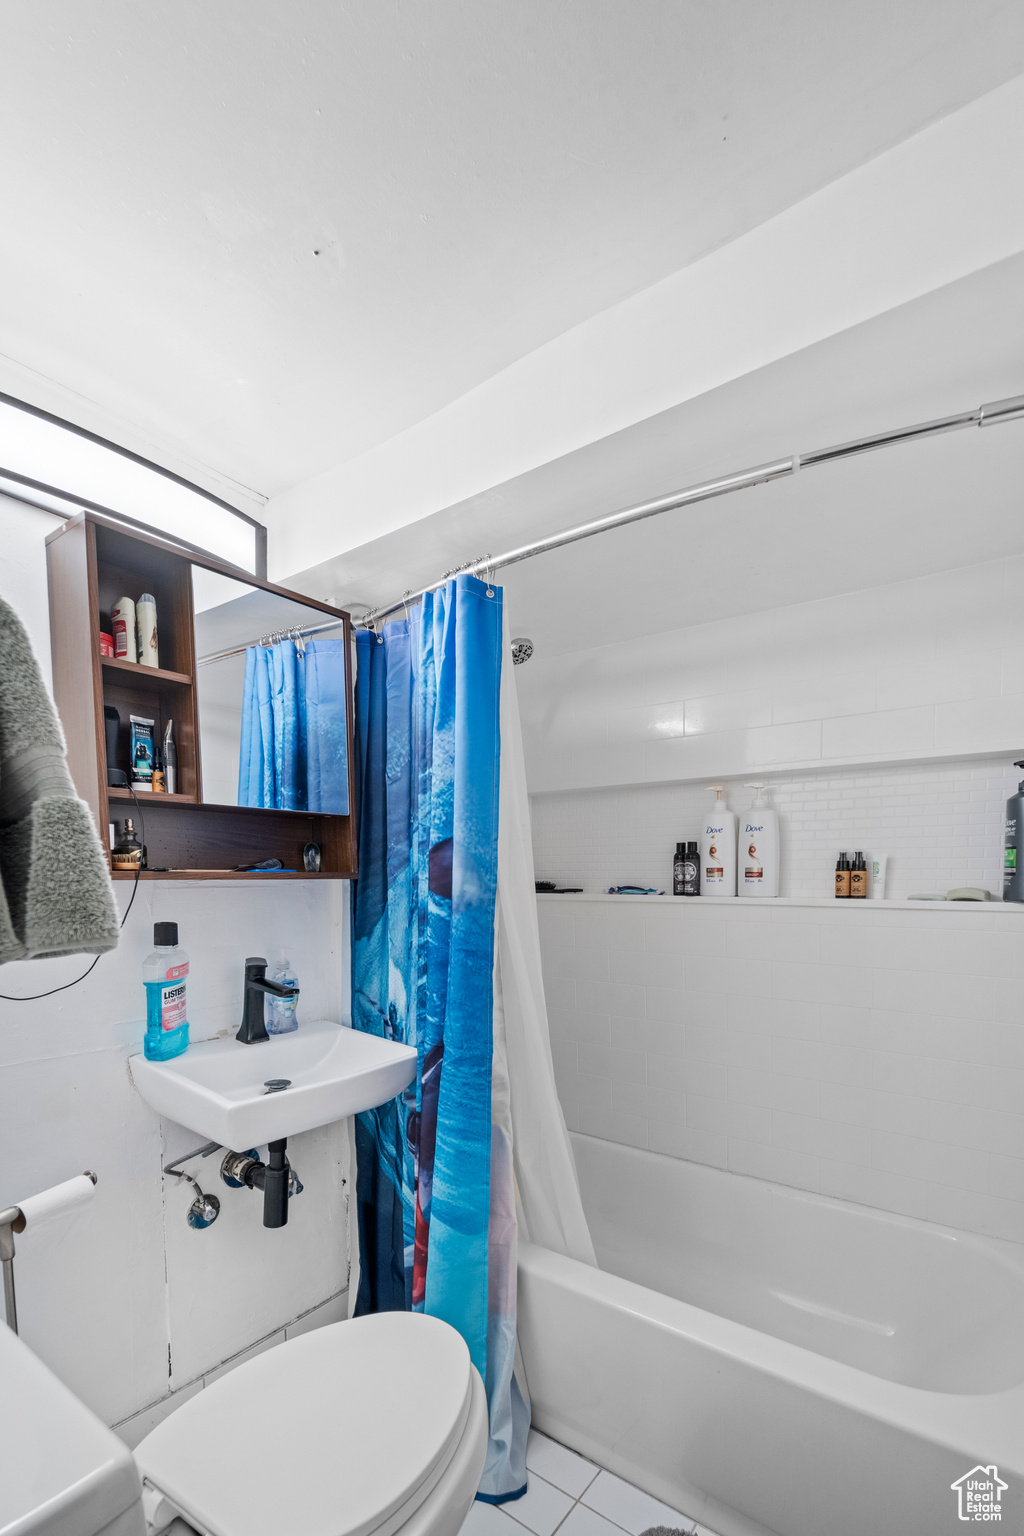 Bathroom with tile floors, shower / bath combination with curtain, and toilet